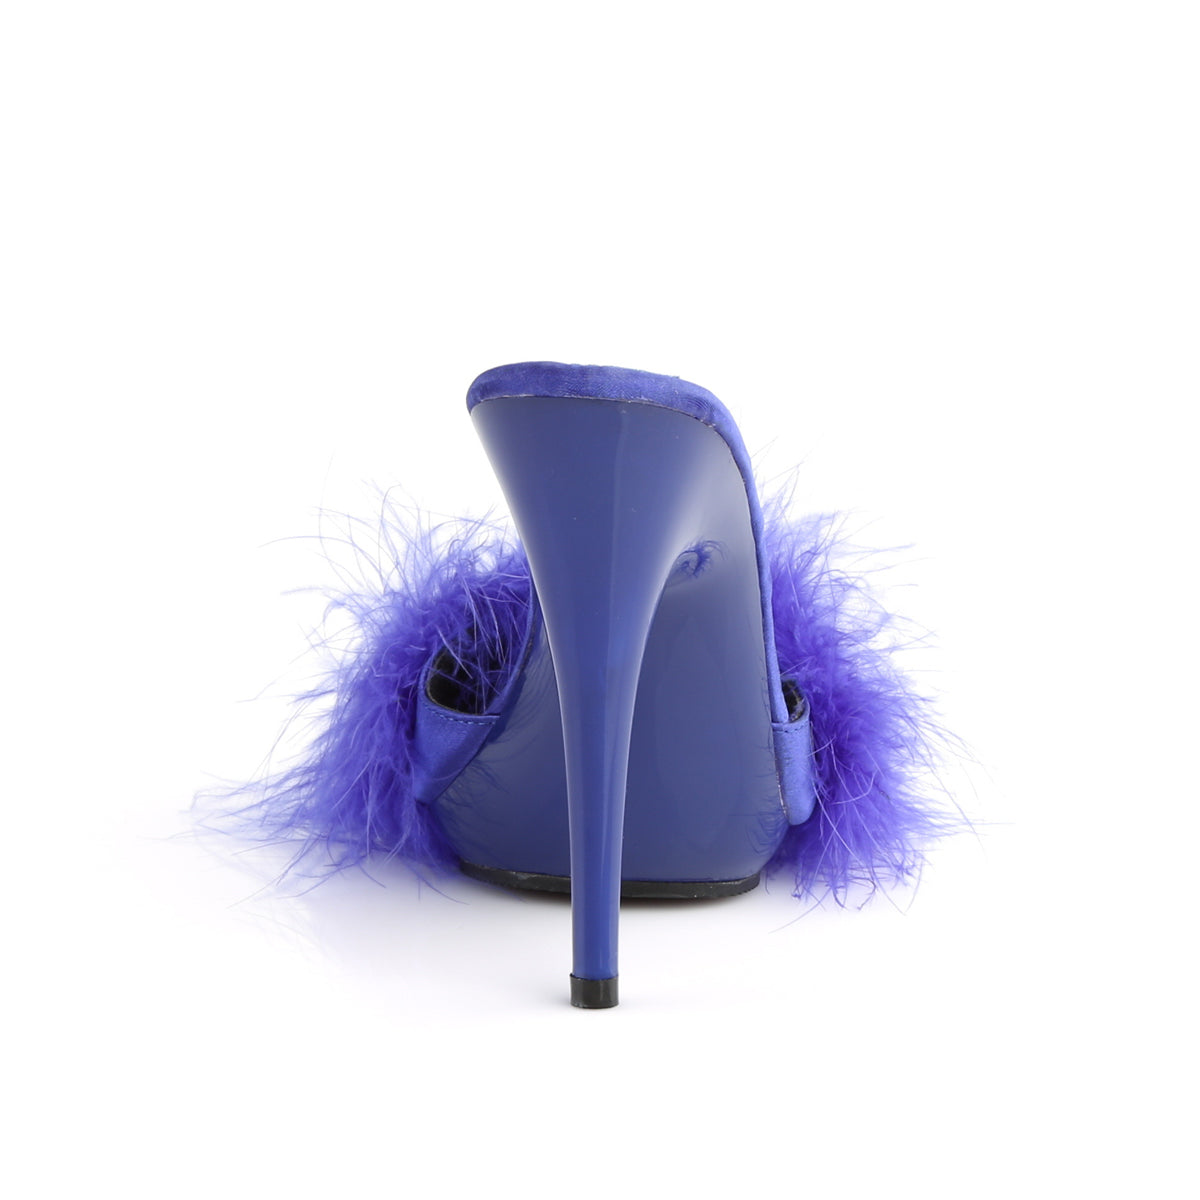 POISE-501F Fabulicious 5" Heel Blue Satin Marabou Sexy Shoes-Fabulicious- Sexy Shoes Fetish Footwear